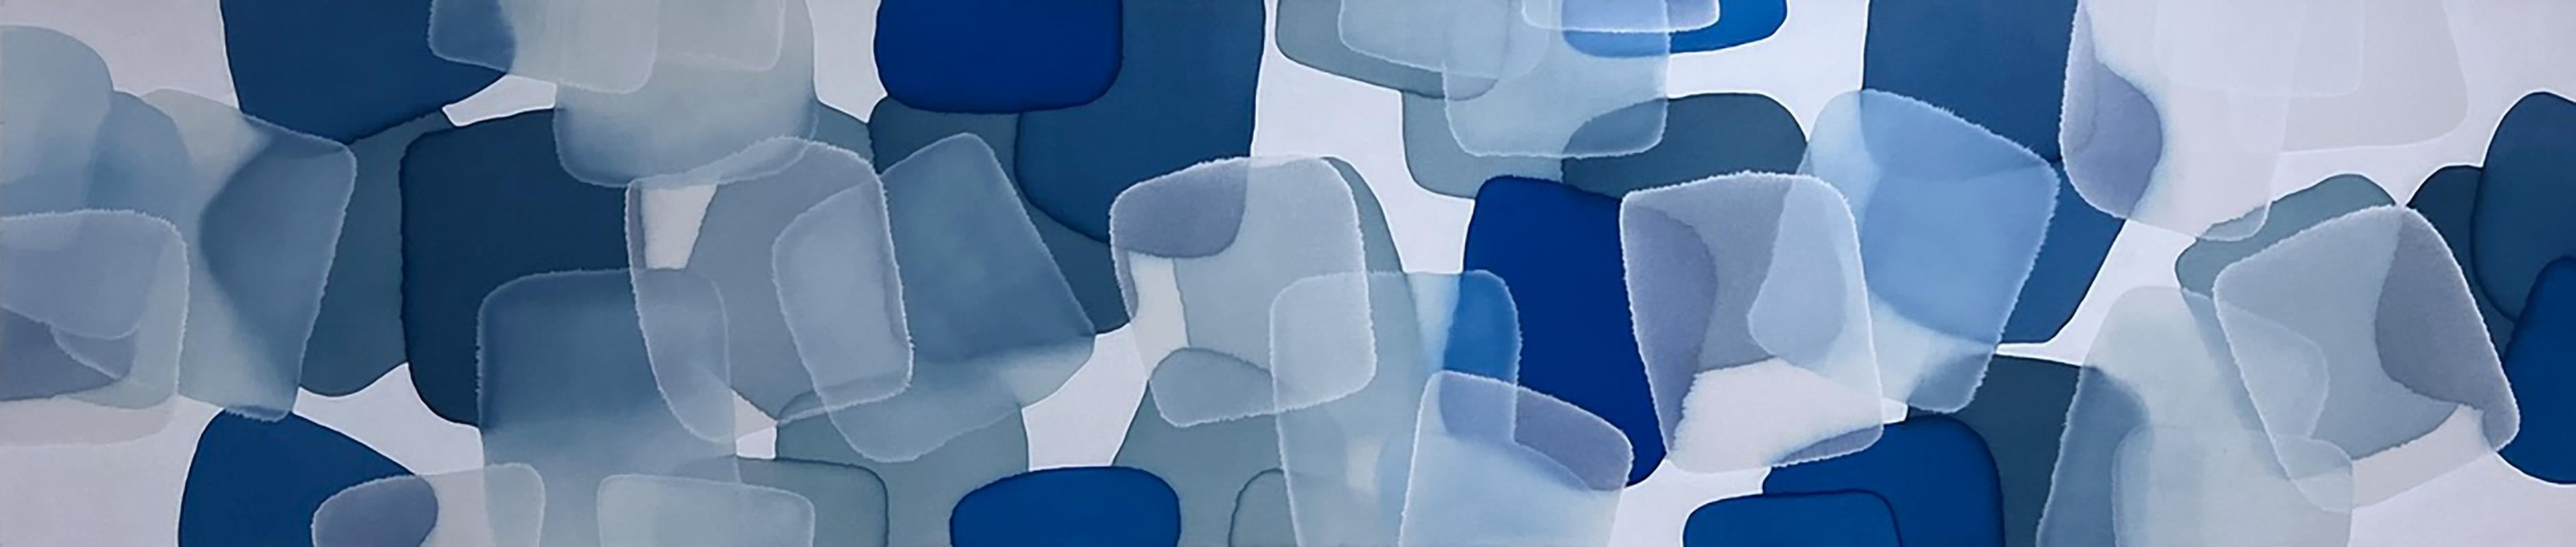 CHARLIE BLUETT
'The Deep Blue Dream'
Acrylic on Canvas
18 x 82 in.
____________________________

Charlie Bluett's art works are driven by his overriding passion for Nature and the Natural world. It's ethereality, beauty, ebb and flow, as well and